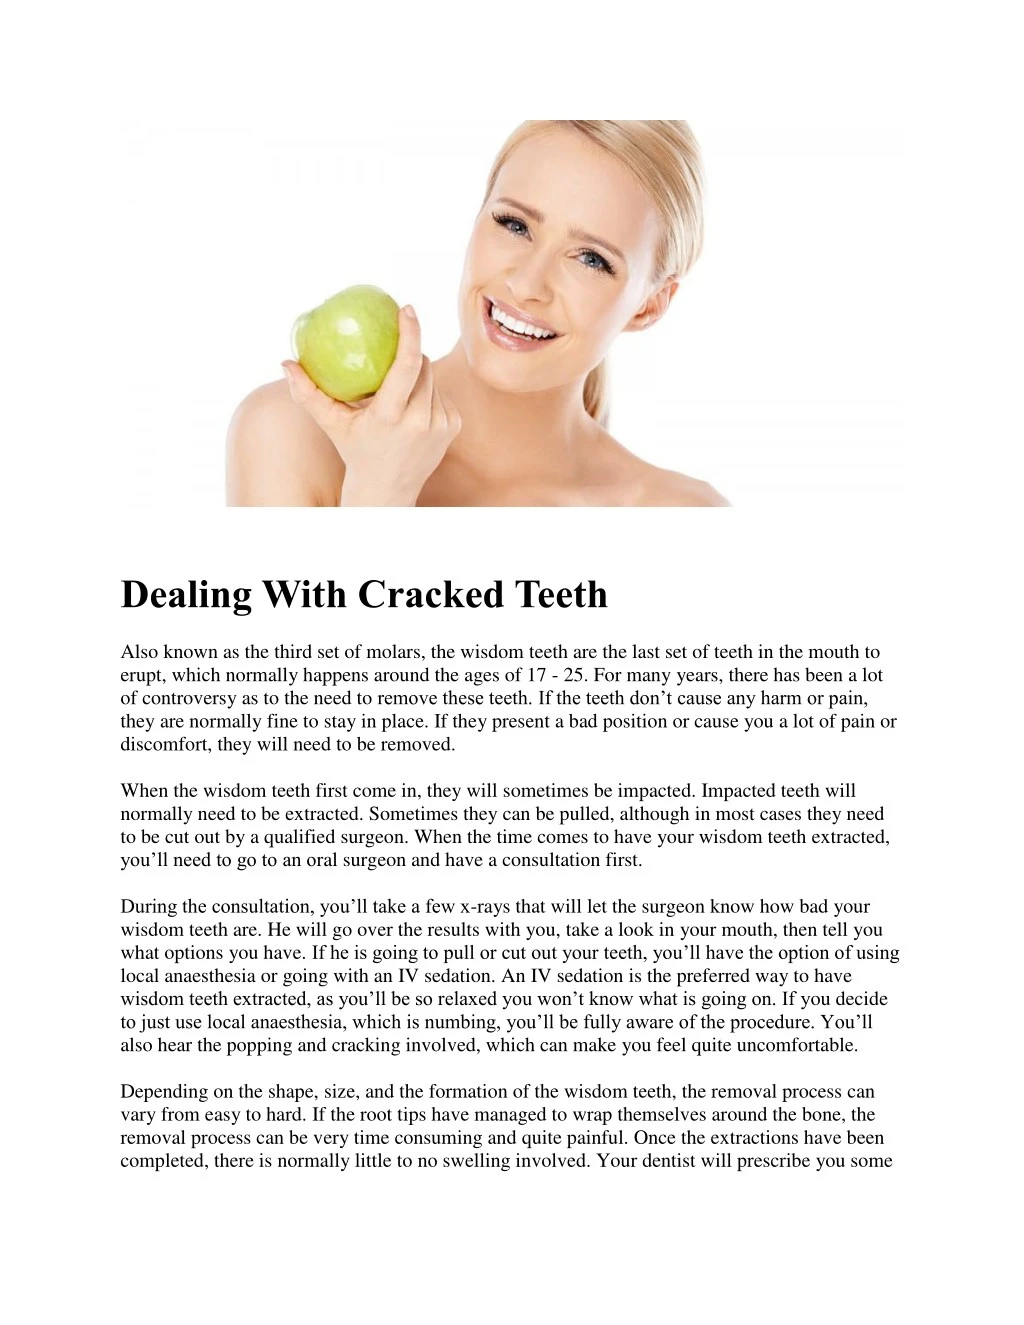 dealing with cracked teeth